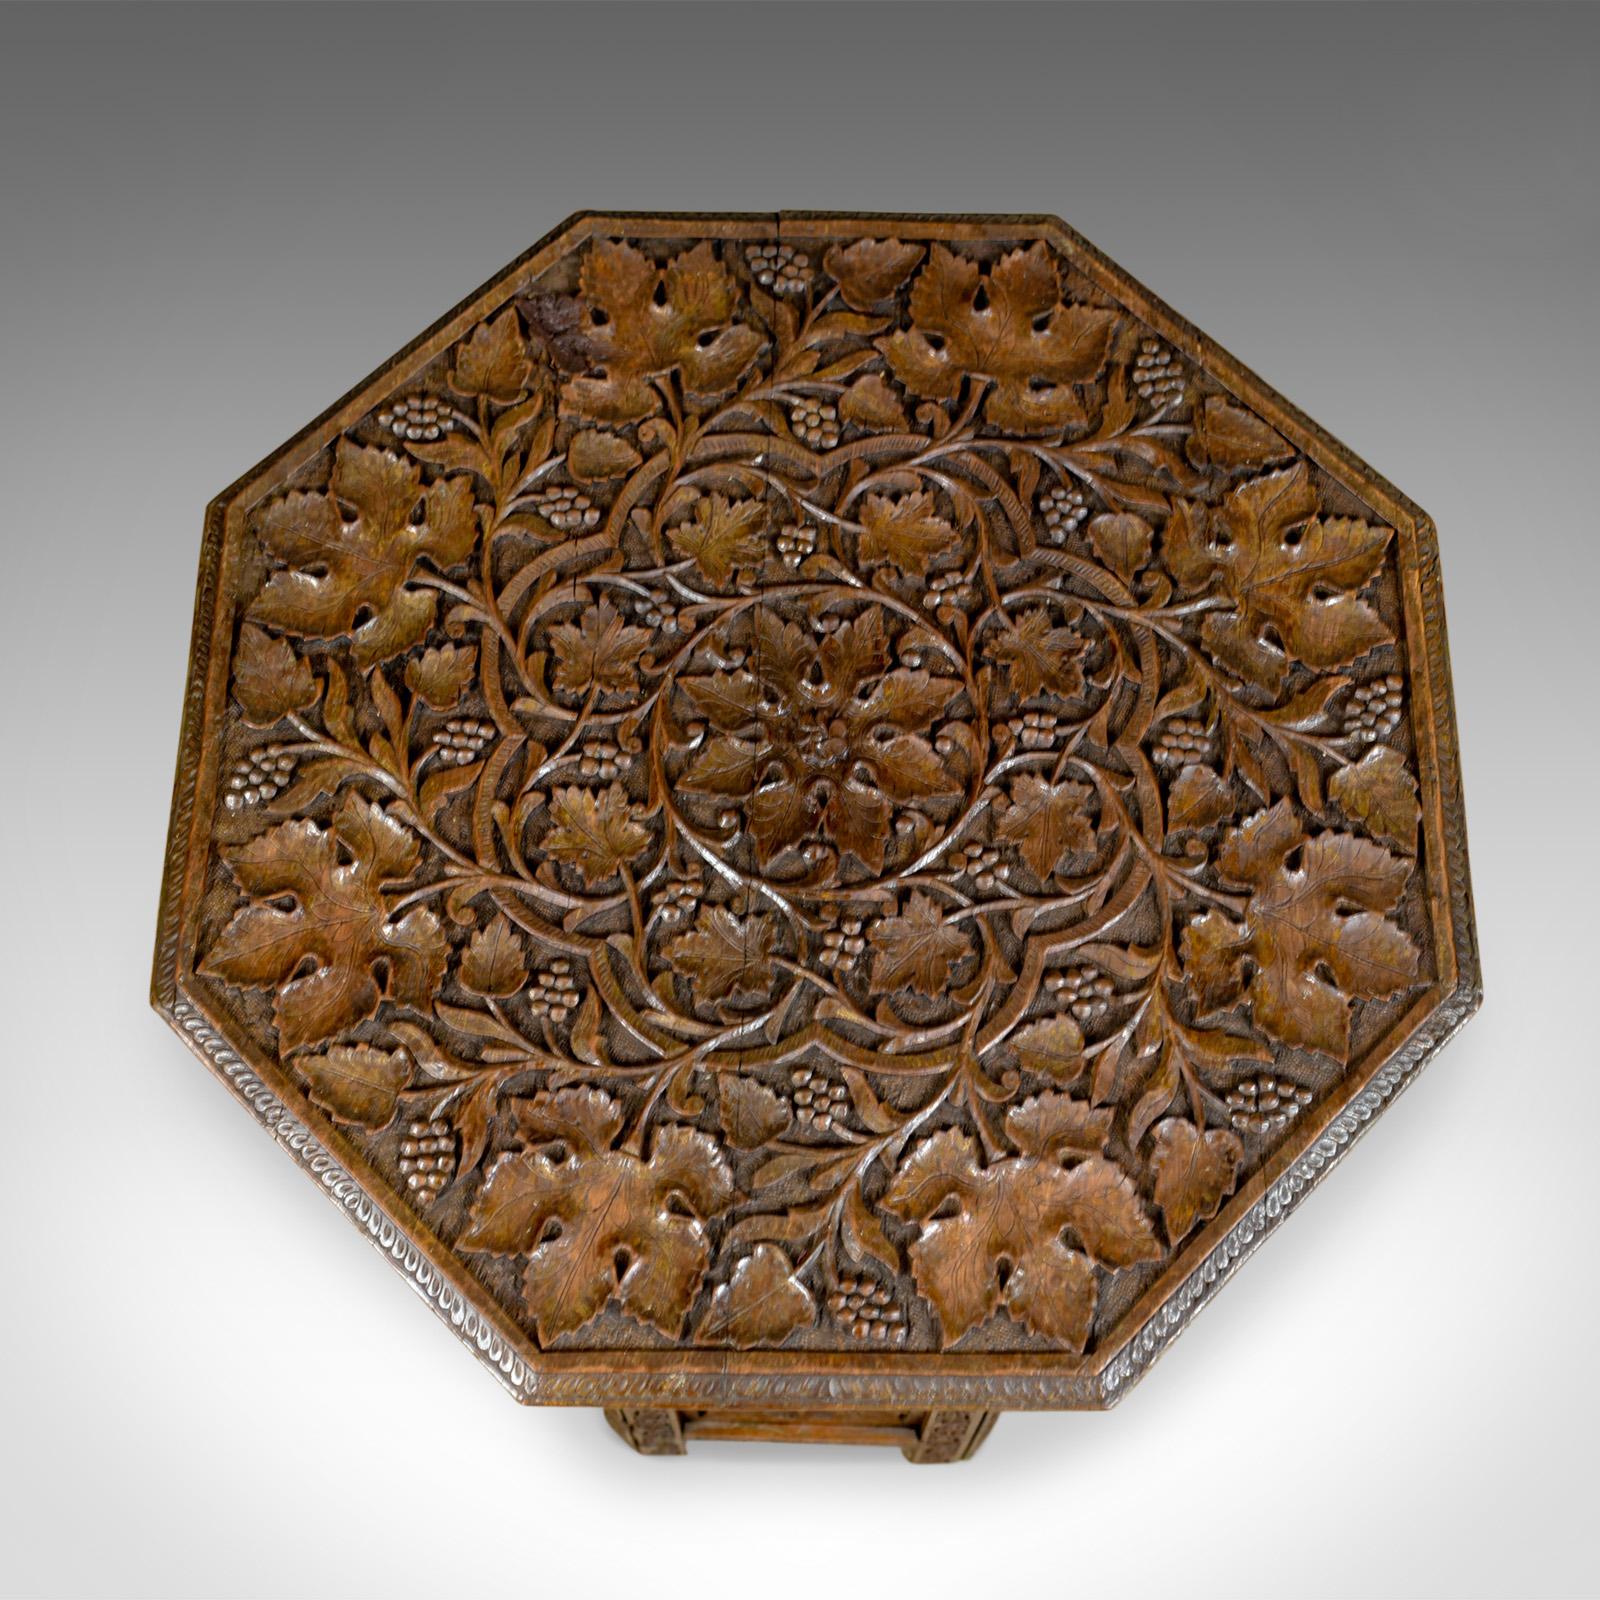 This is an antique campaign table, a beautifully carved, Anglo-Indian, teak side table dating to the turn of the century, circa 1900.

Profusely carved in deep relief
Fruit and foliate detail to the octagonal top
Pierced detailing to folding